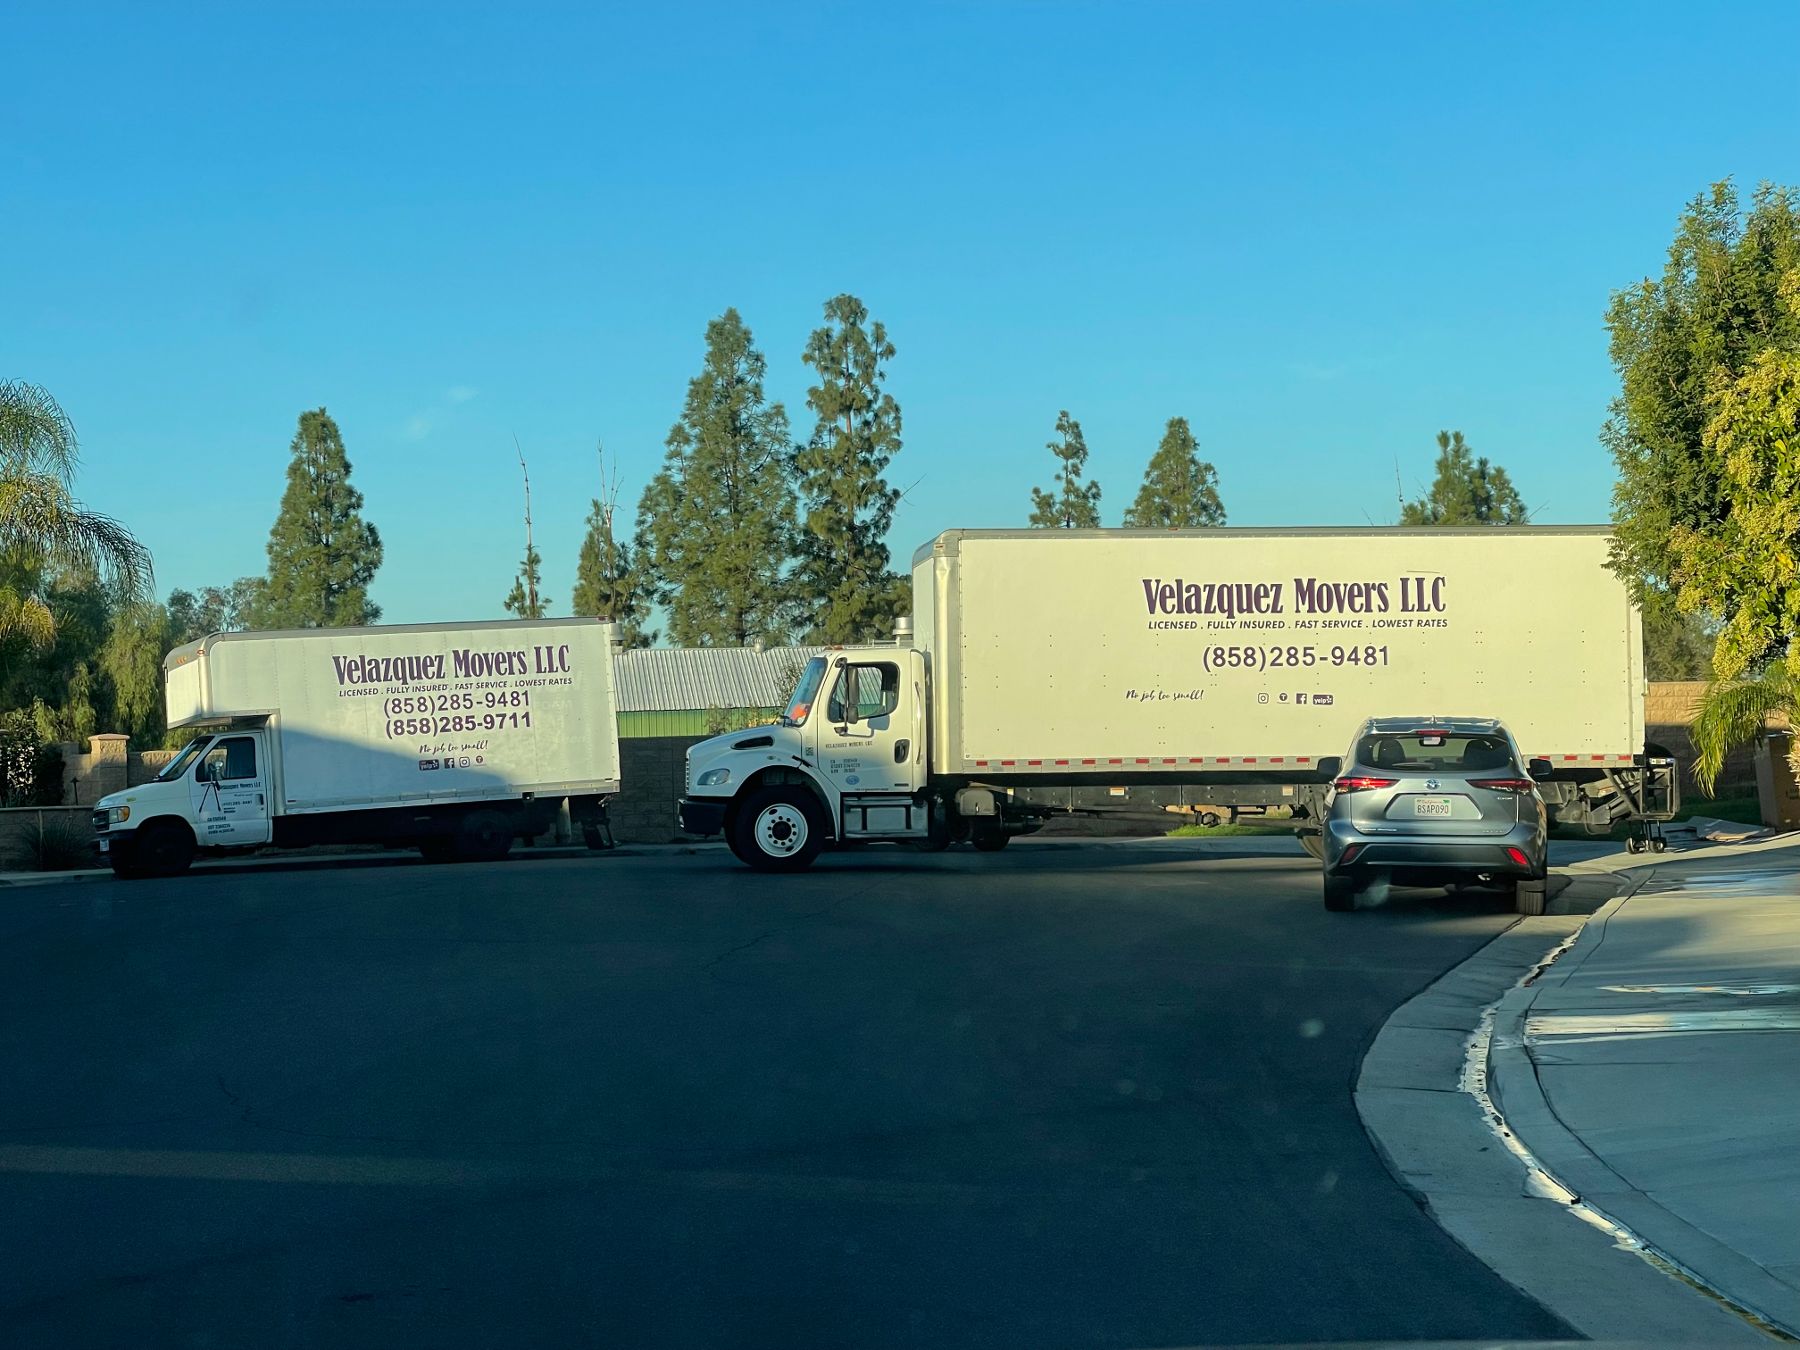 Two Velazquez Movers LLC moving trucks sit parked along the roadway.